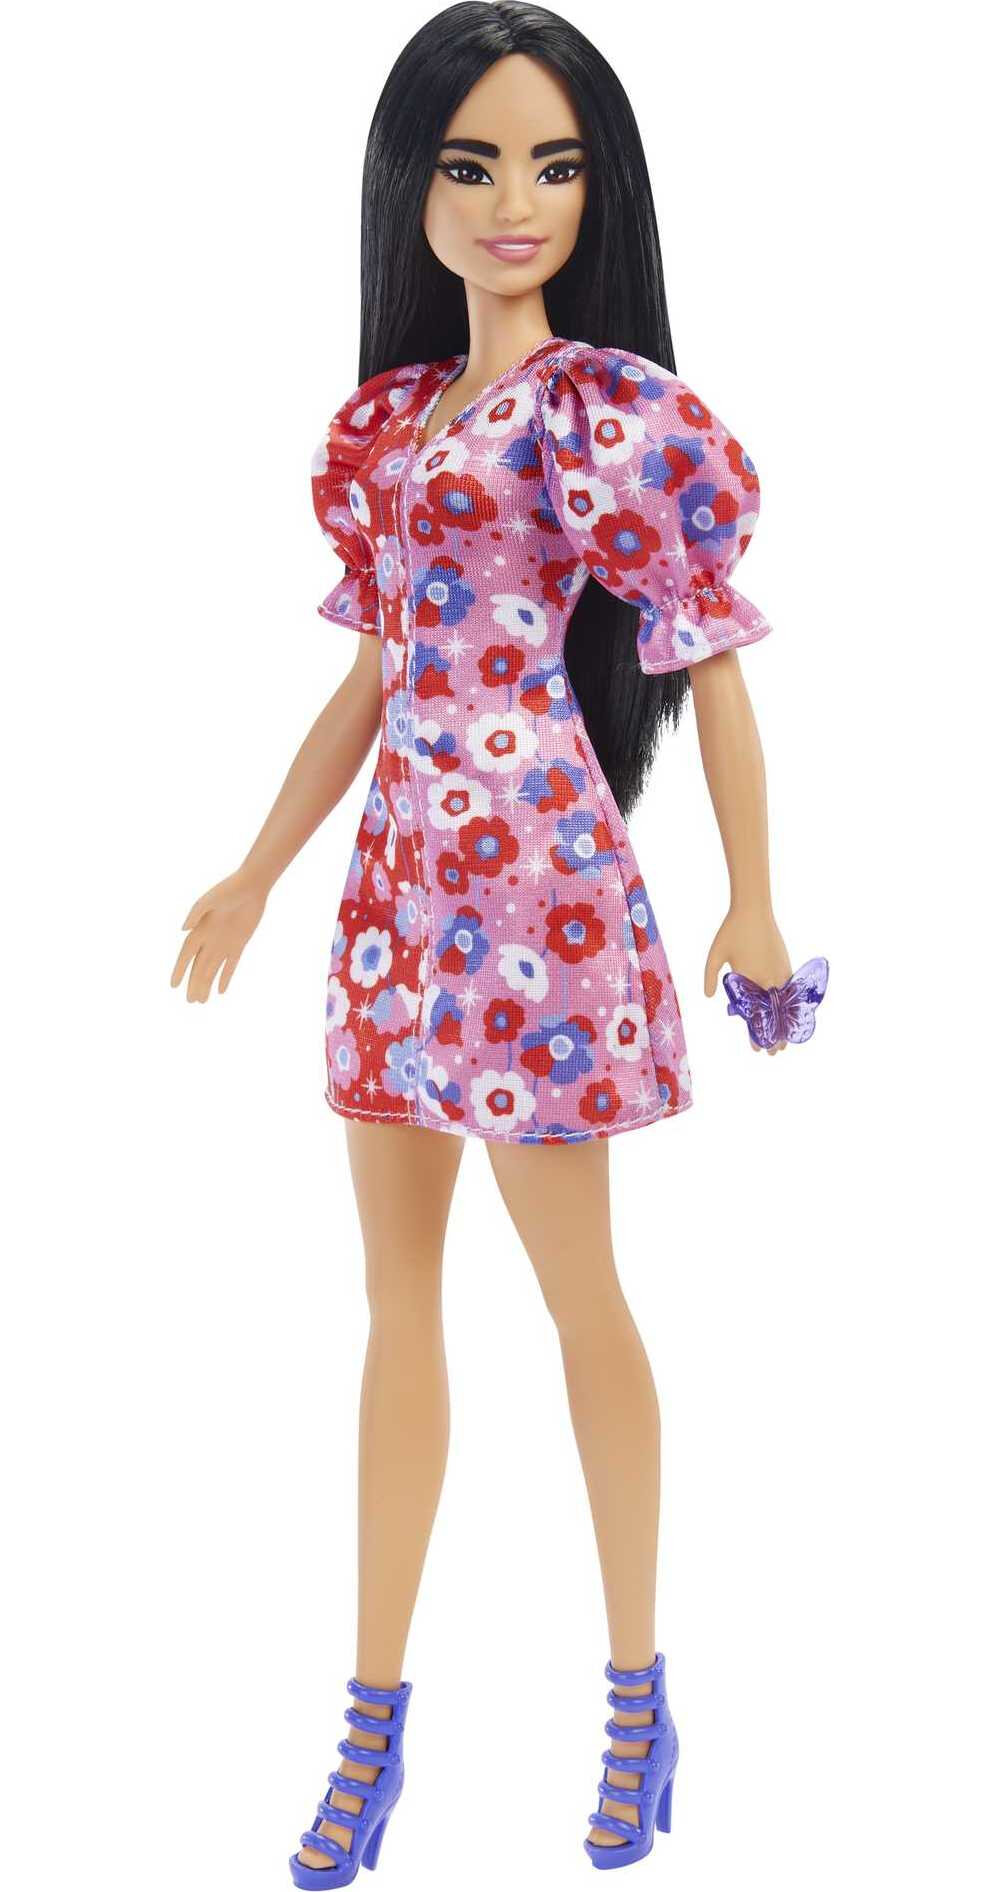 Barbie Fashionistas Doll #177 with Black Hair in Floral Dress & Strappy ...